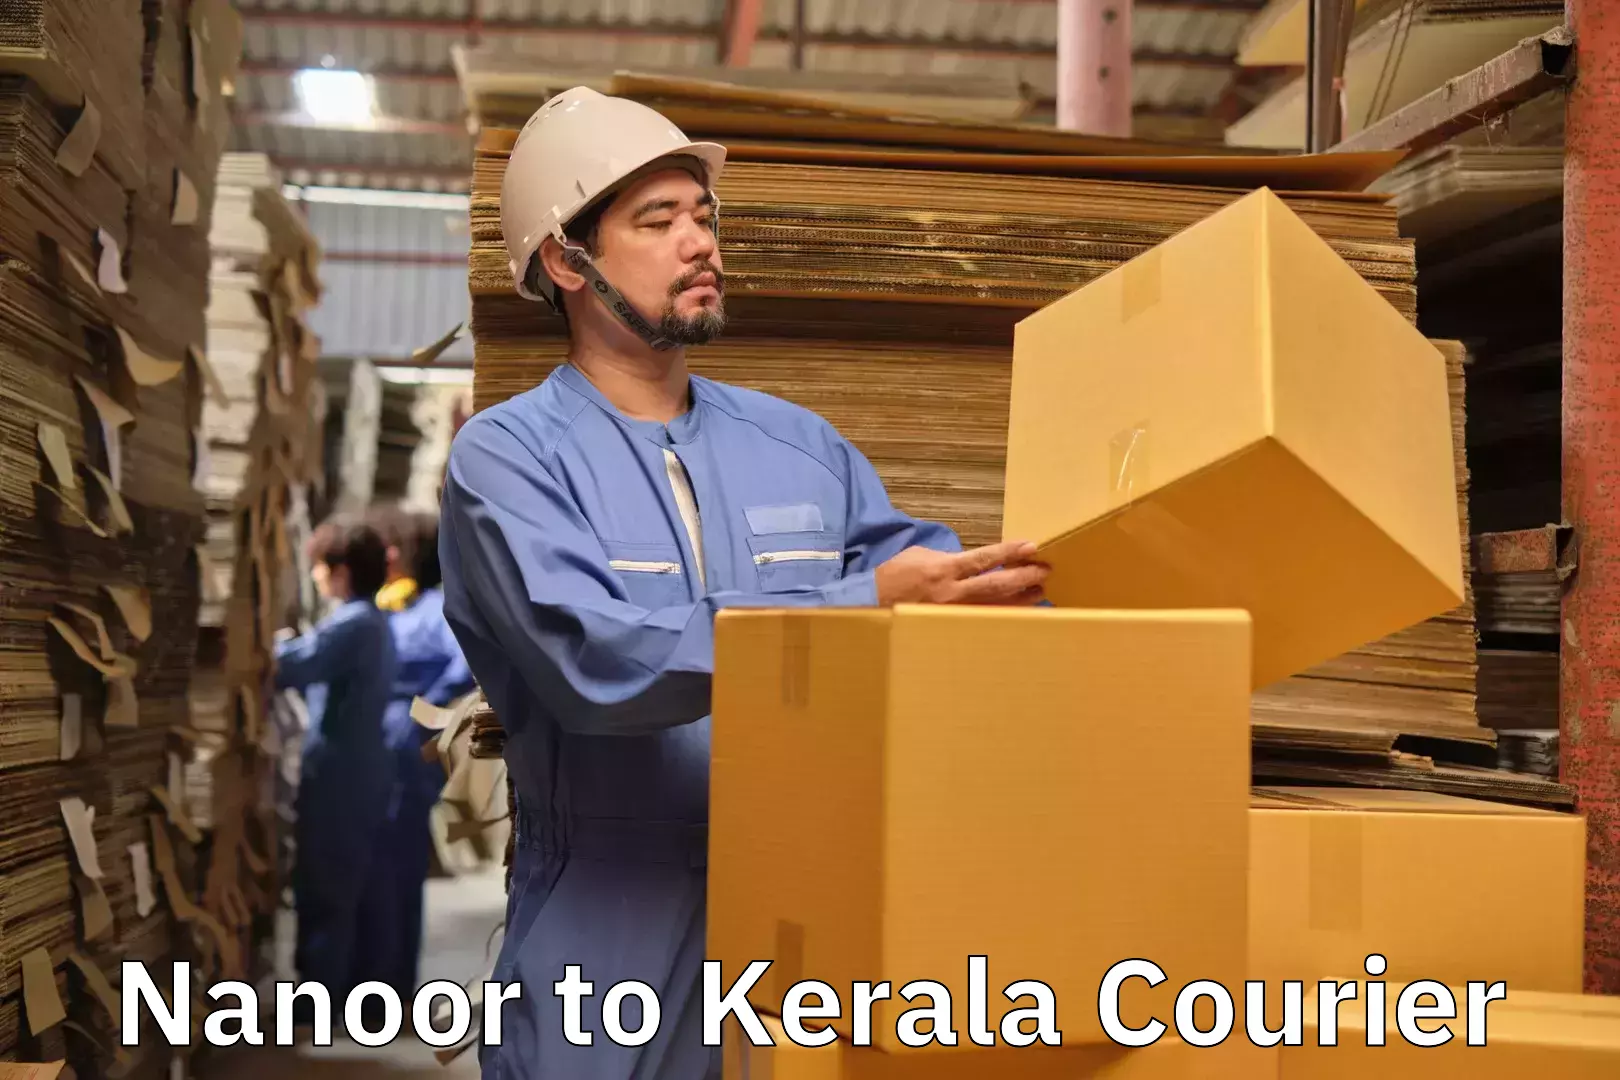 Luggage shipping specialists Nanoor to Kerala